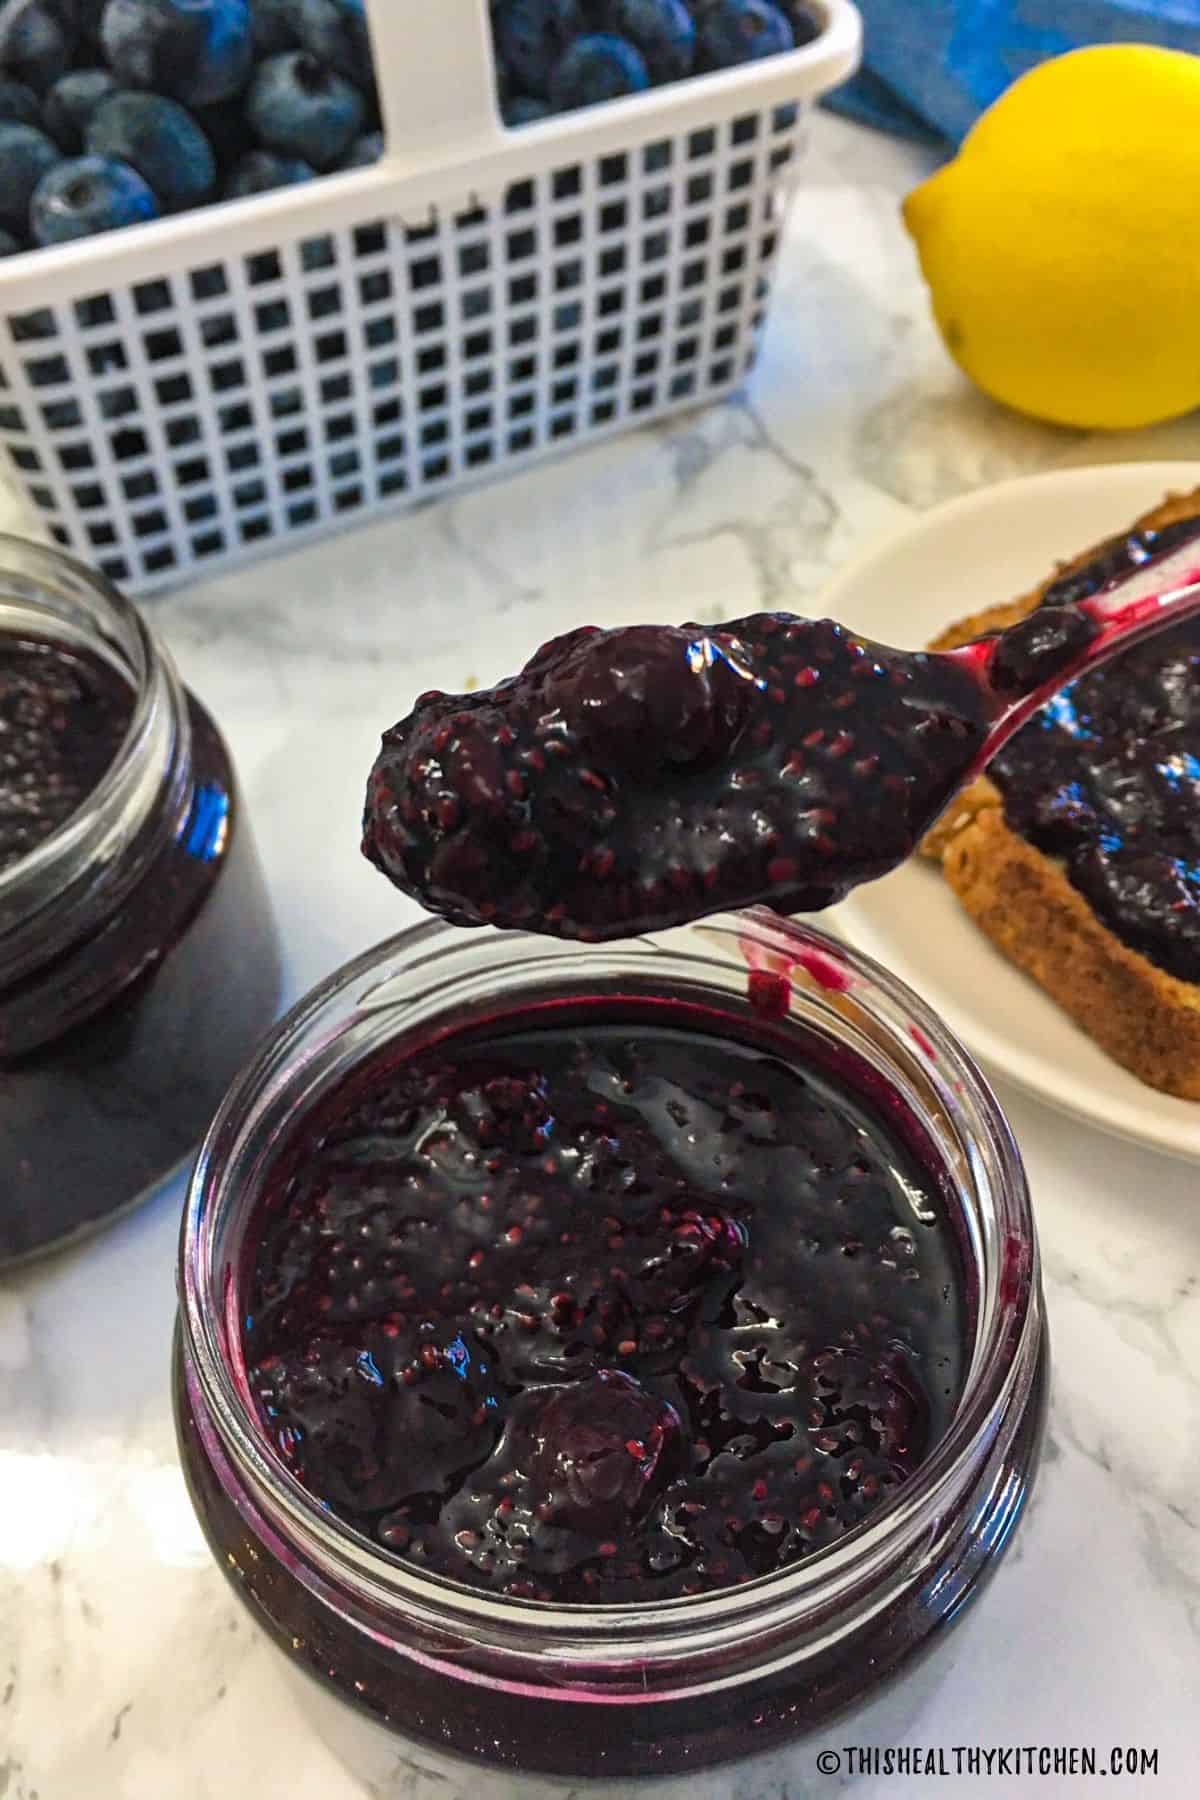 Spoonful of blueberry chia jam being held above jar of jam on kitchen counter.